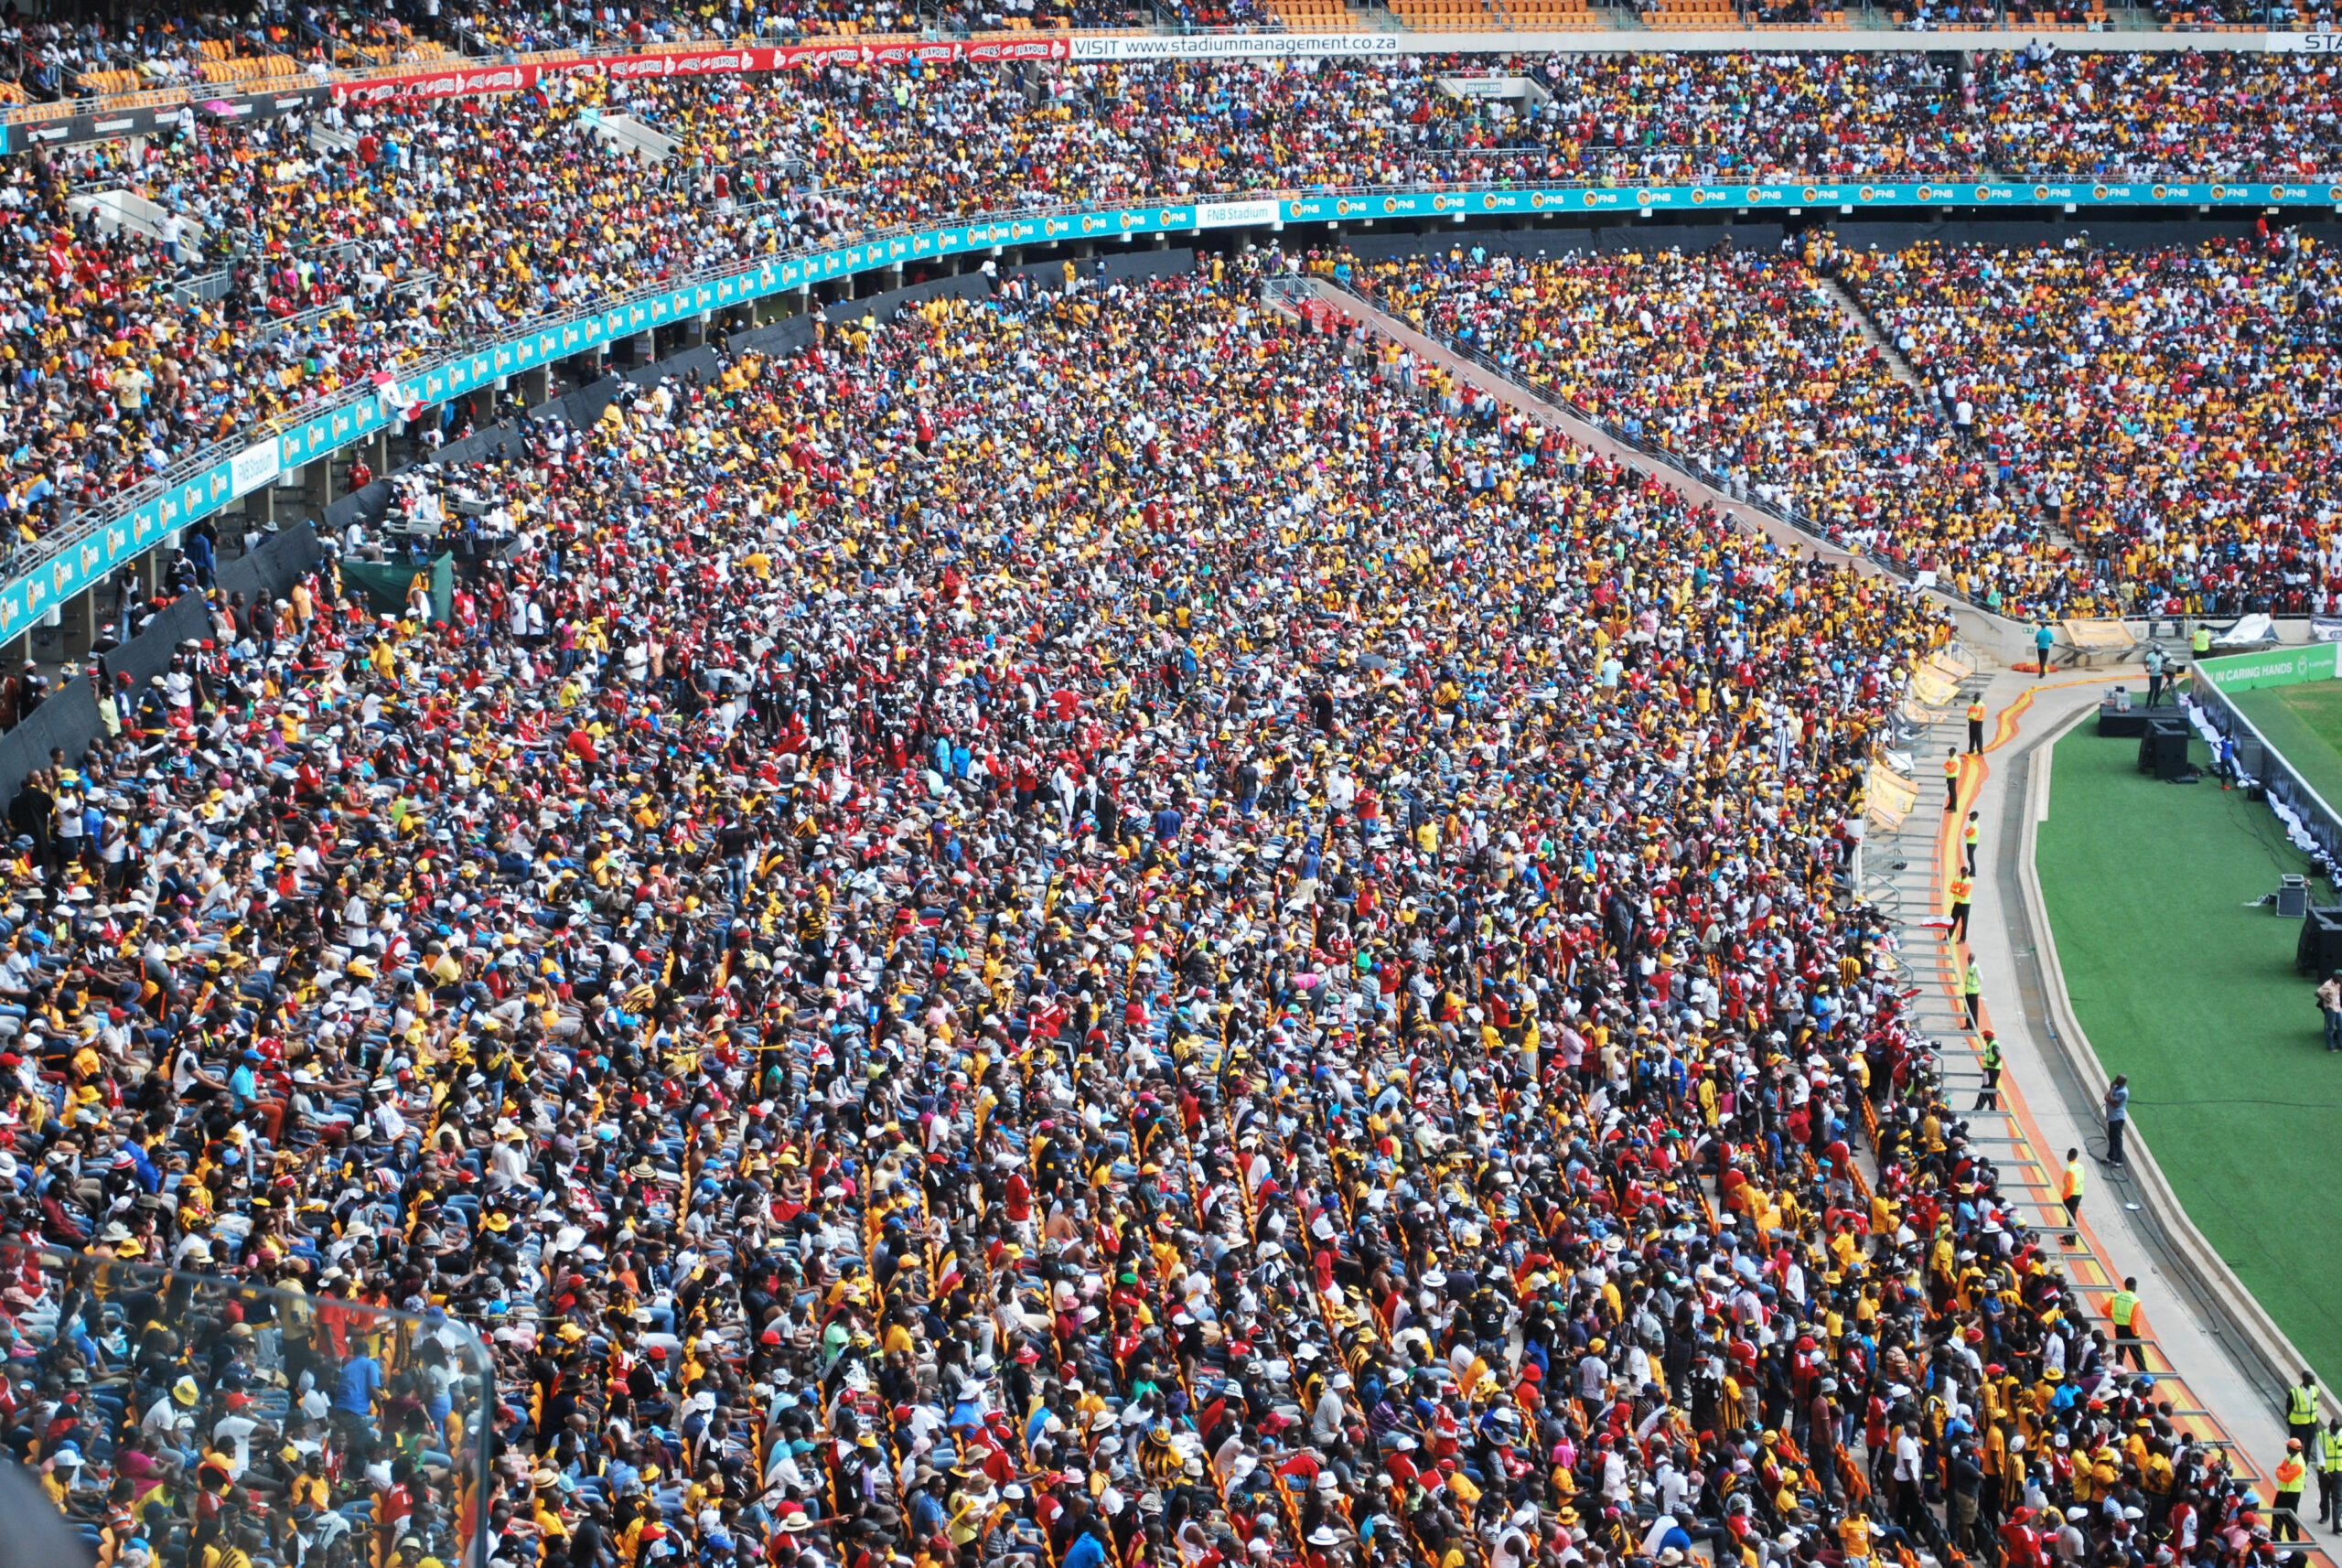 crowd-at-a-stadium-in-johannesburg-south-africa-for-rugby-2741194